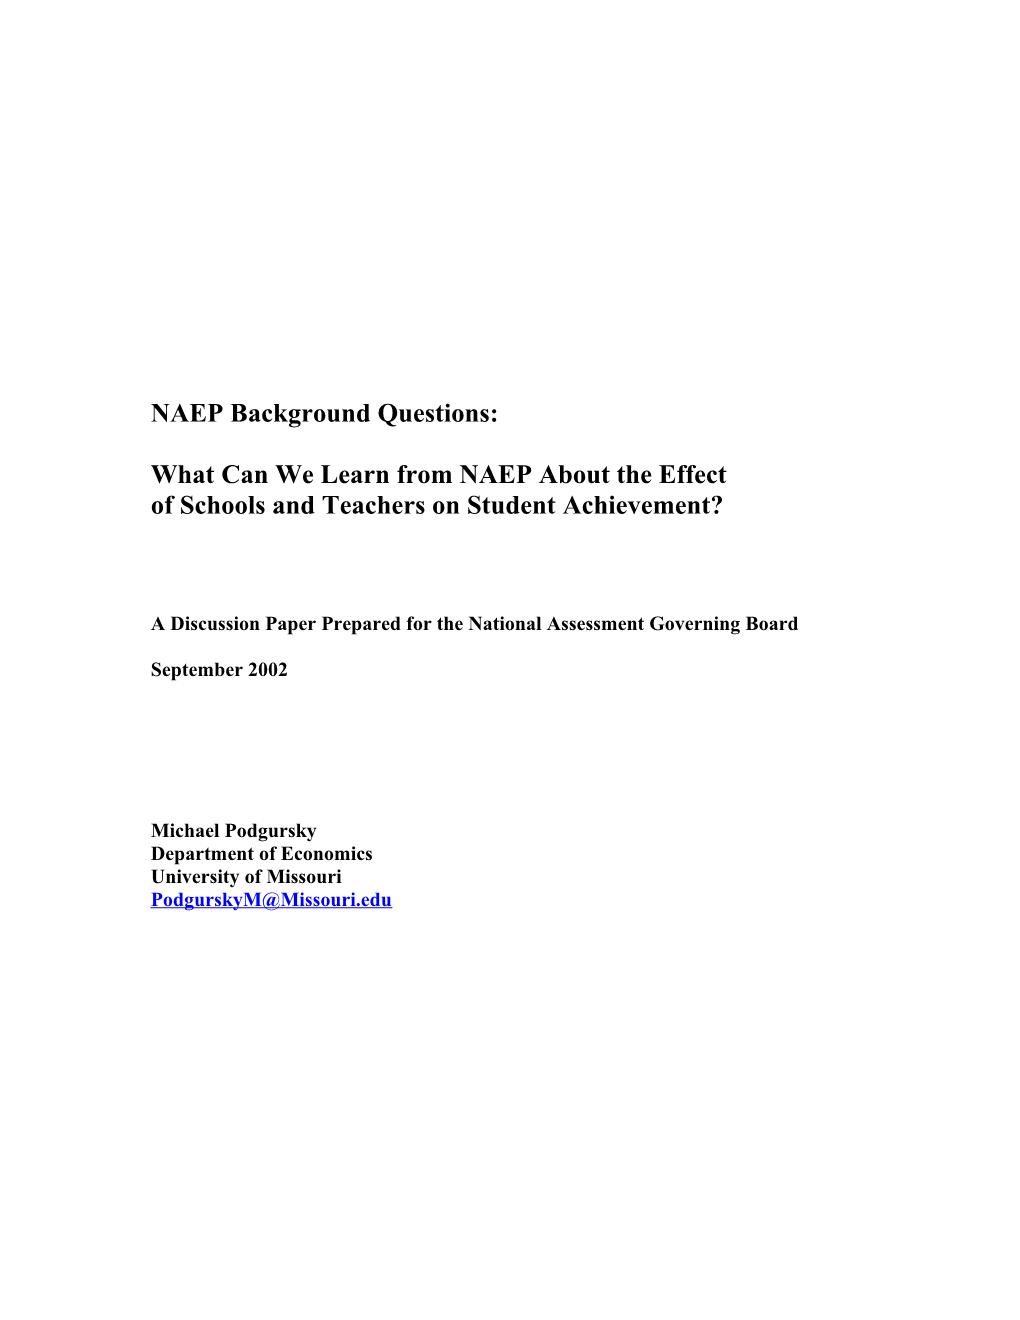 What Can We Learn From NAEP About The Effect Of Schools And Teachers On Student Achievement?